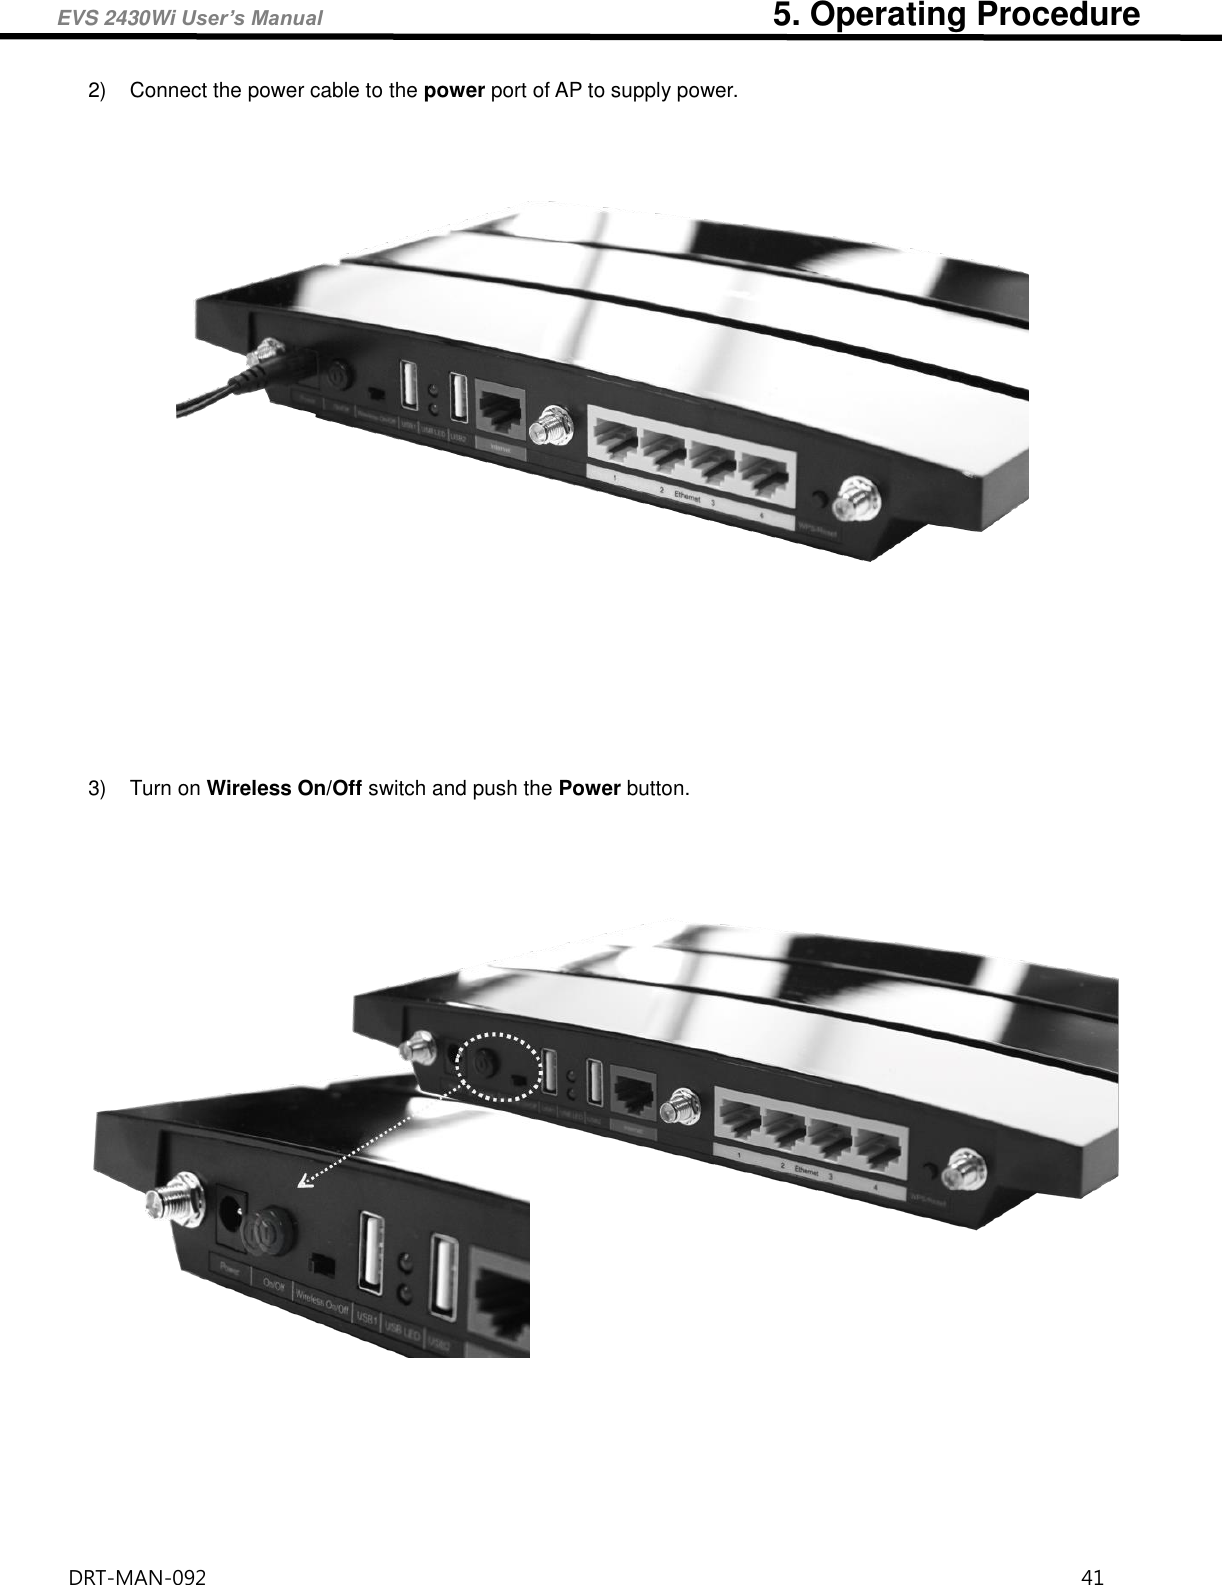 EVS 2430Wi User’s Manual                                                      5. Operating Procedure DRT-MAN-092                                                                                    41   2)  Connect the power cable to the power port of AP to supply power.     3)  Turn on Wireless On/Off switch and push the Power button.       